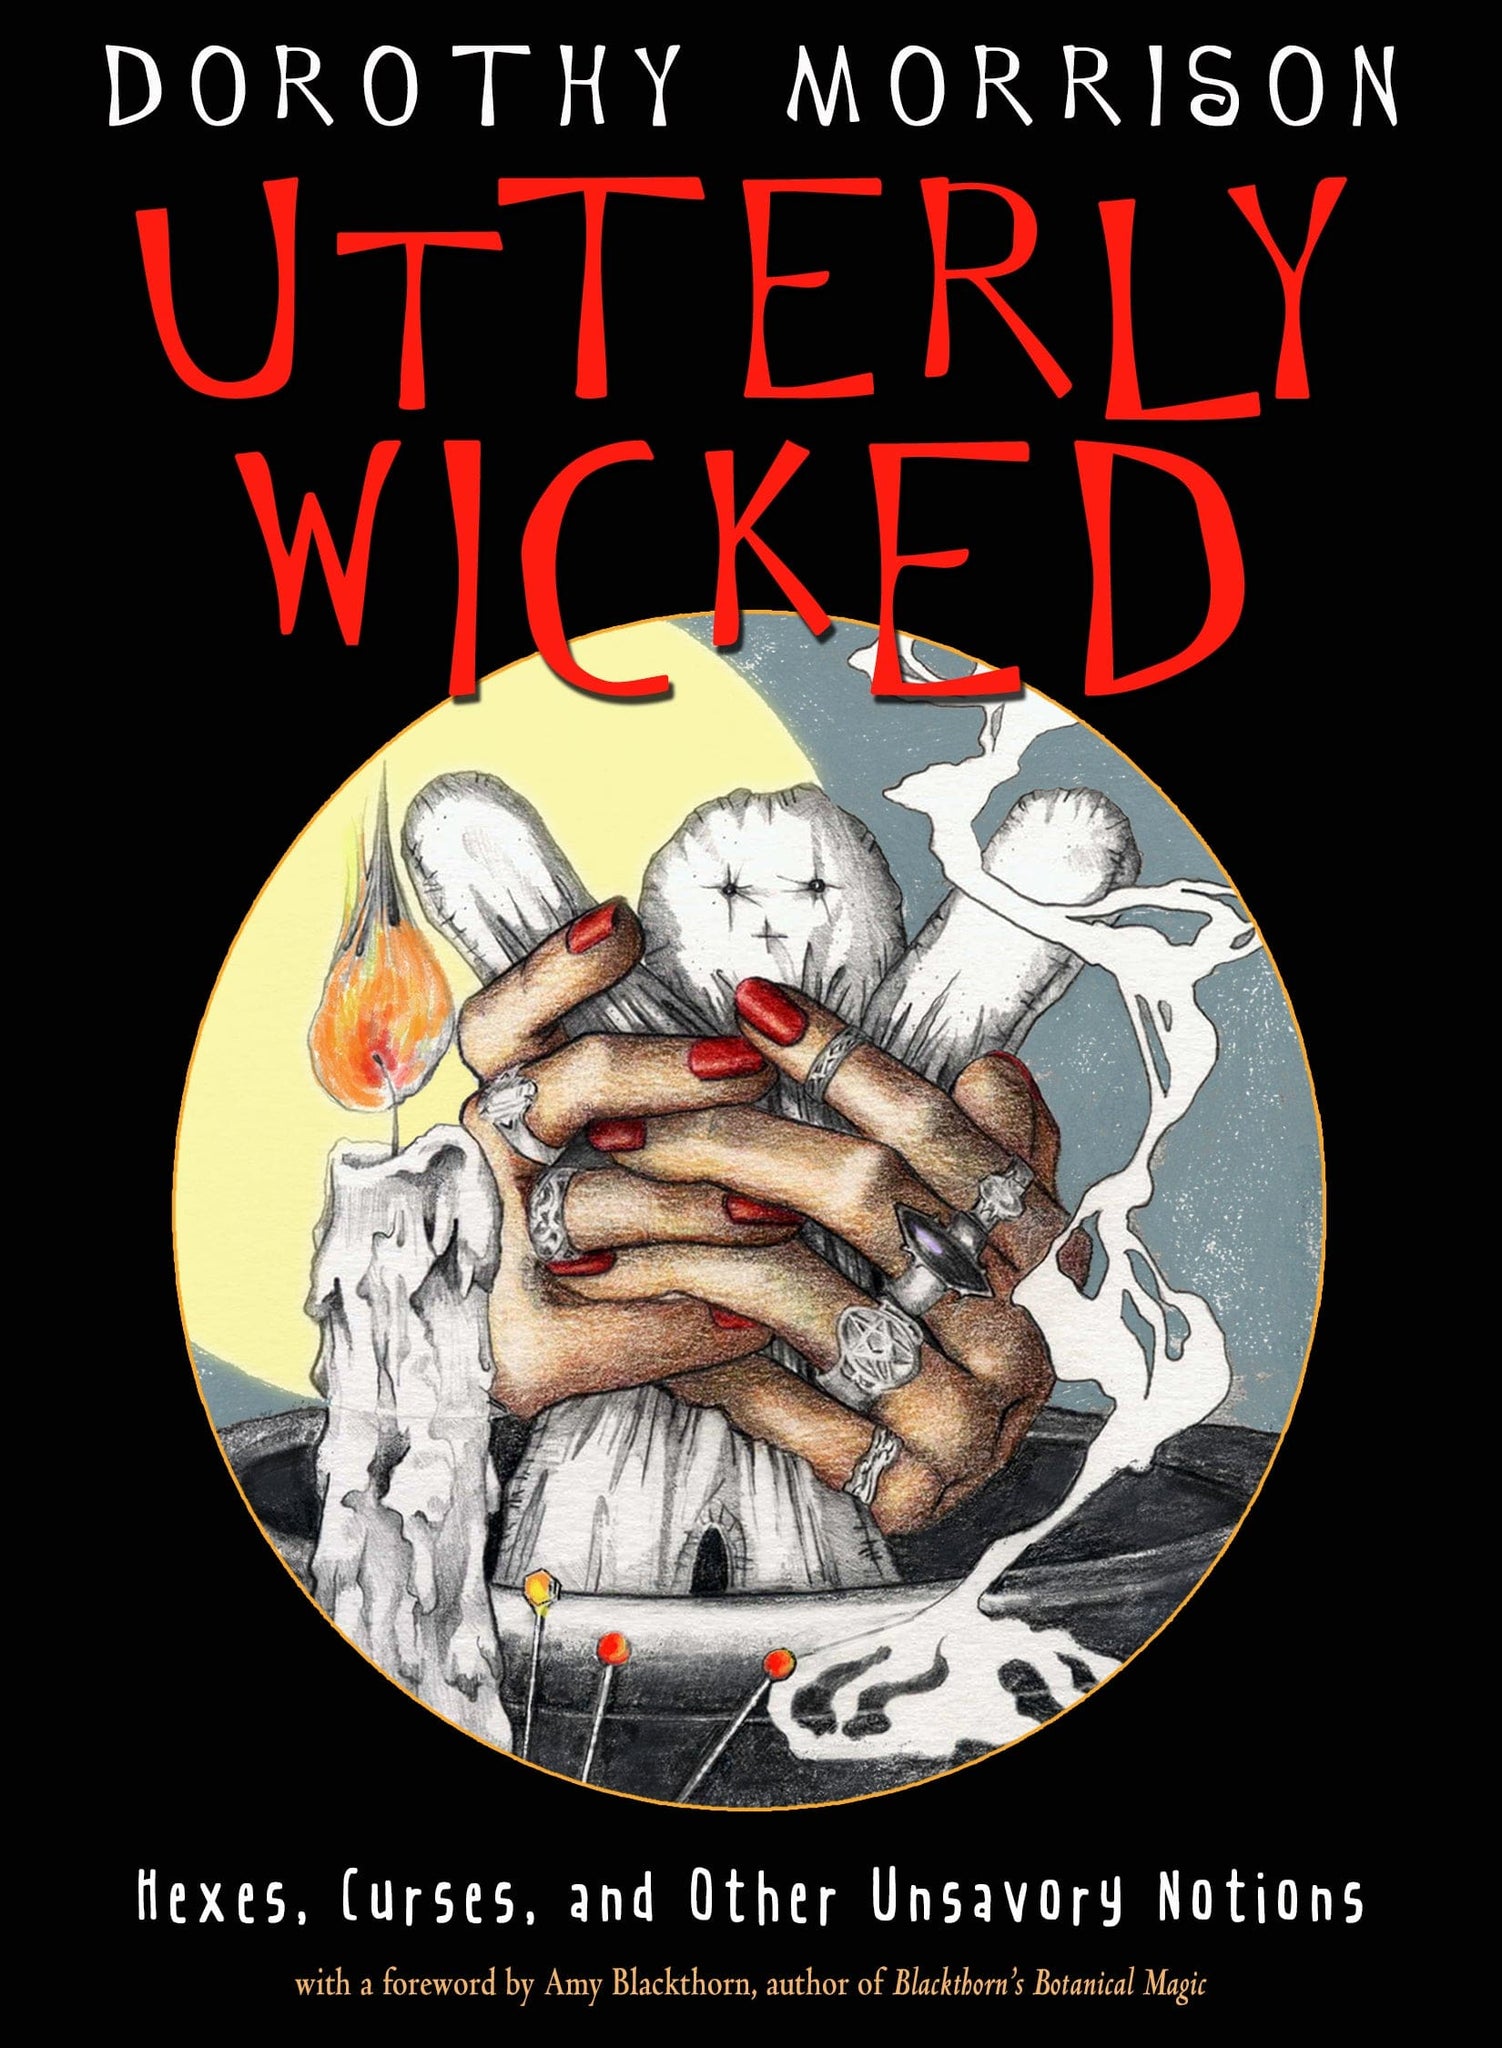 Utterly Wicked - Hexes, Curses, and Other Unsavory Notions by Dorothy Morrison, Foreword Amy Blackthorn